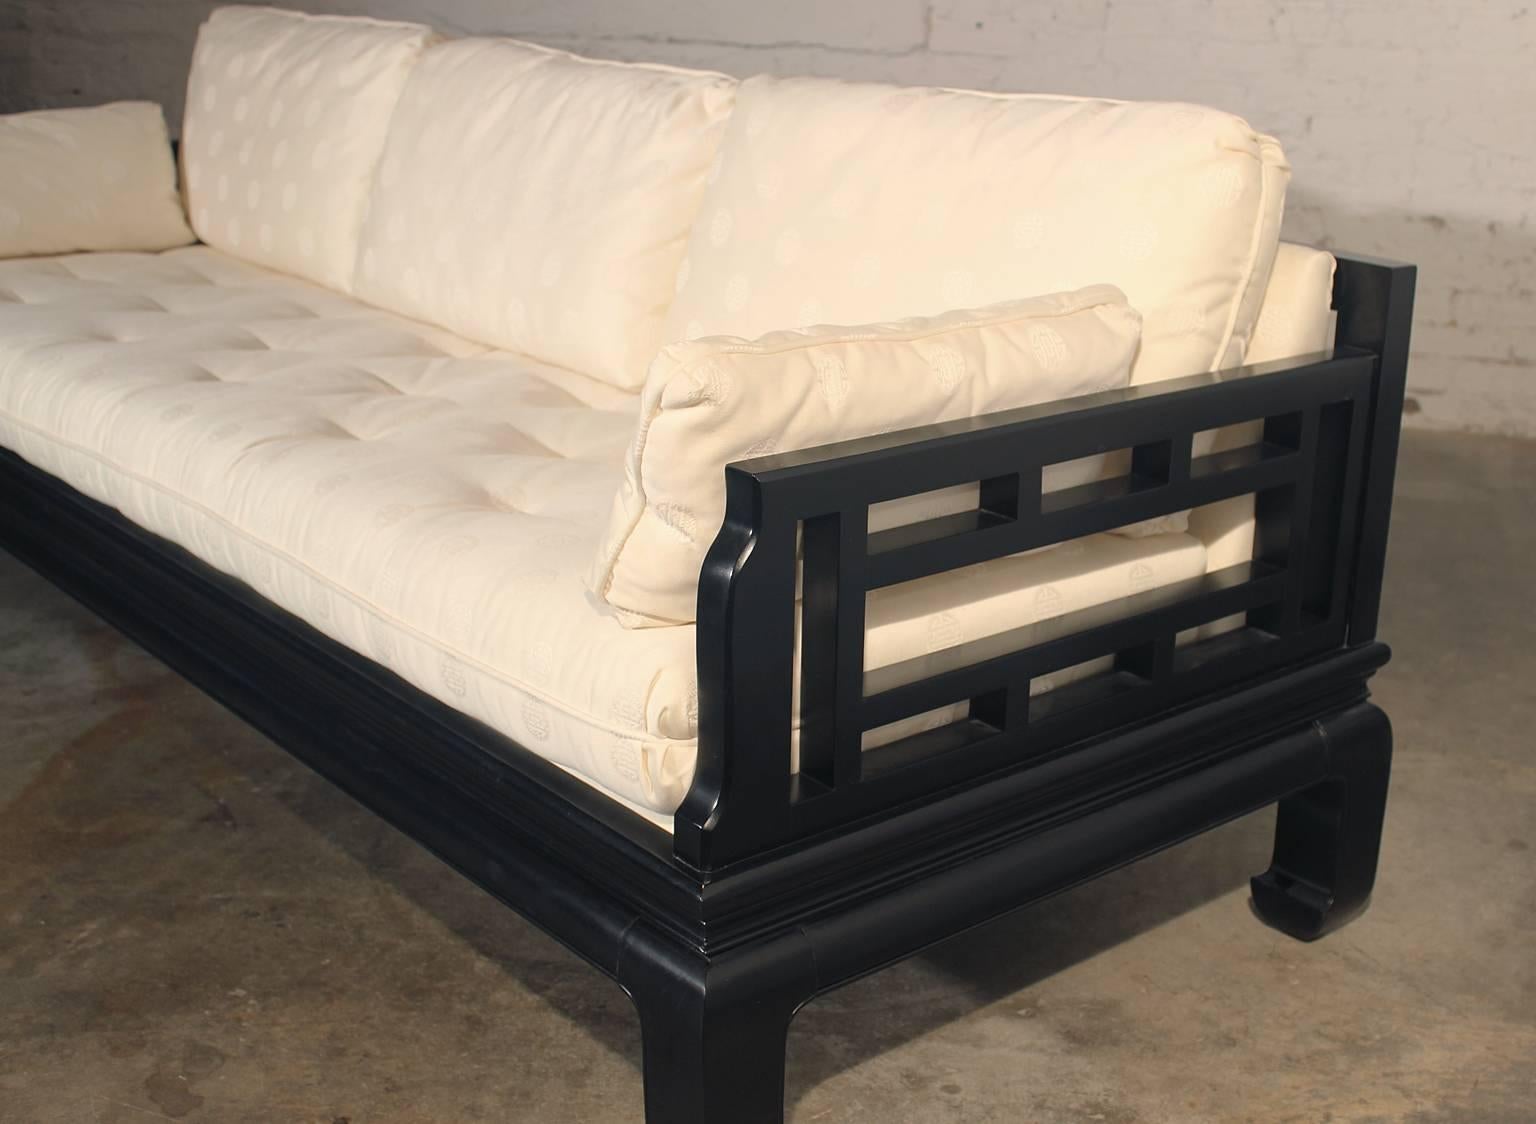 This is a dream sofa! Attributed to Michael Taylor for Baker and Asian inspired. This fabulous vintage sofa has a black lacquer Ming style frame and base with Chinese Chippendale style fretwork in the open arms and back. The white Asian upholstery